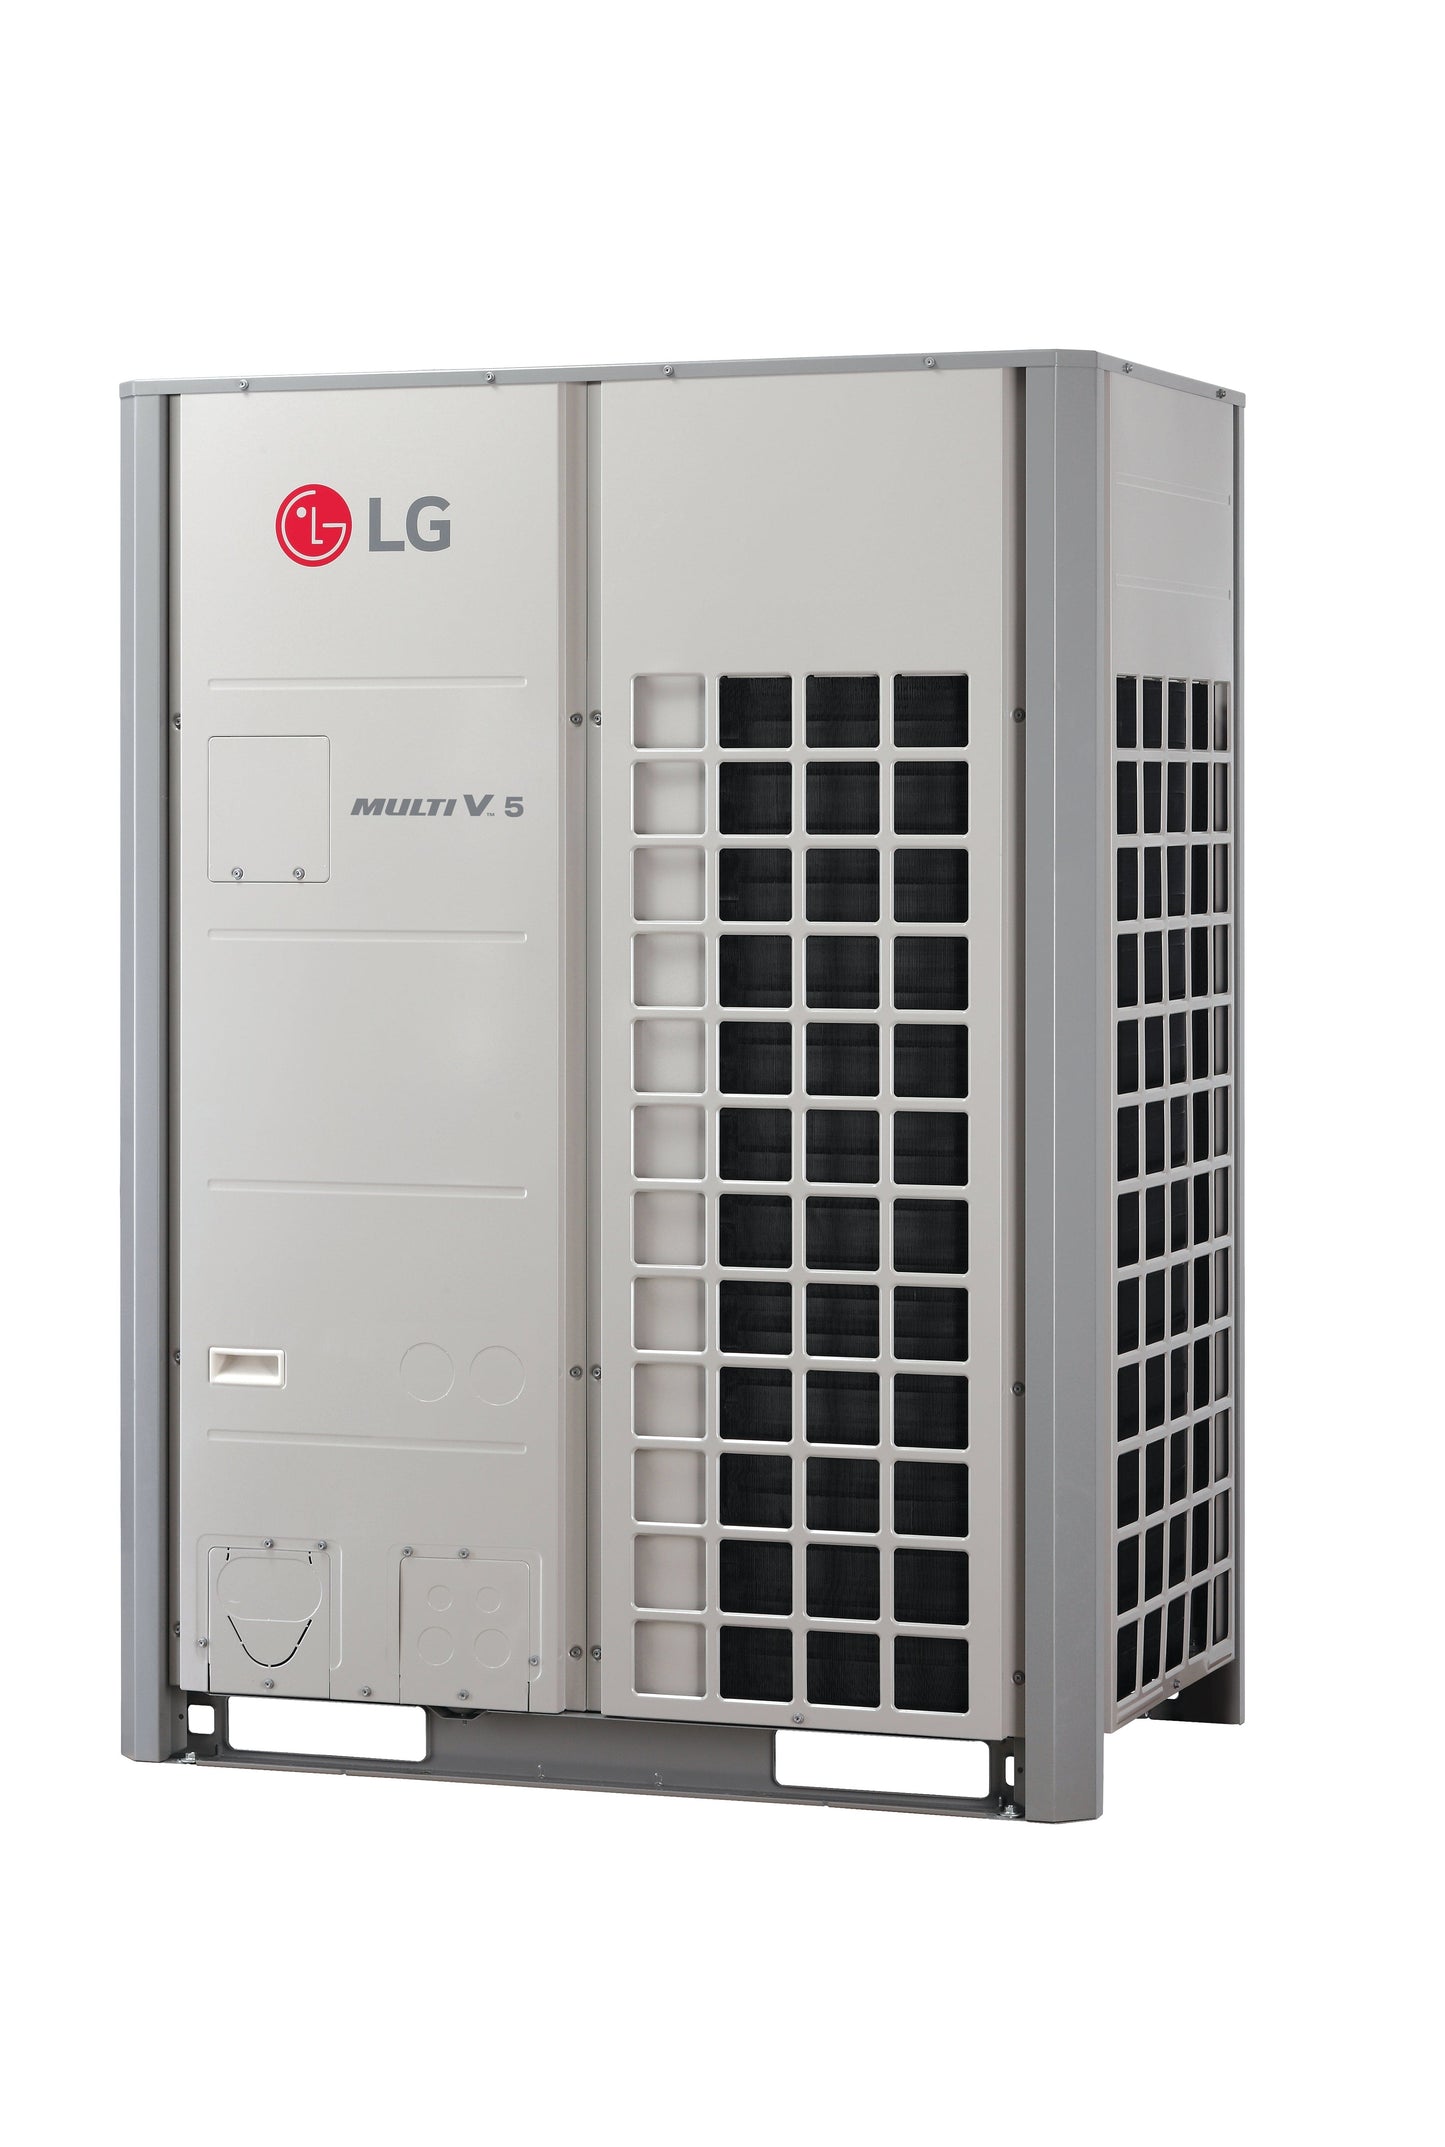 LG MultiV 5 VRF INV System 67.2KW with Dual Sensing Control and High Energy Efficiency - ARUN240LTE5